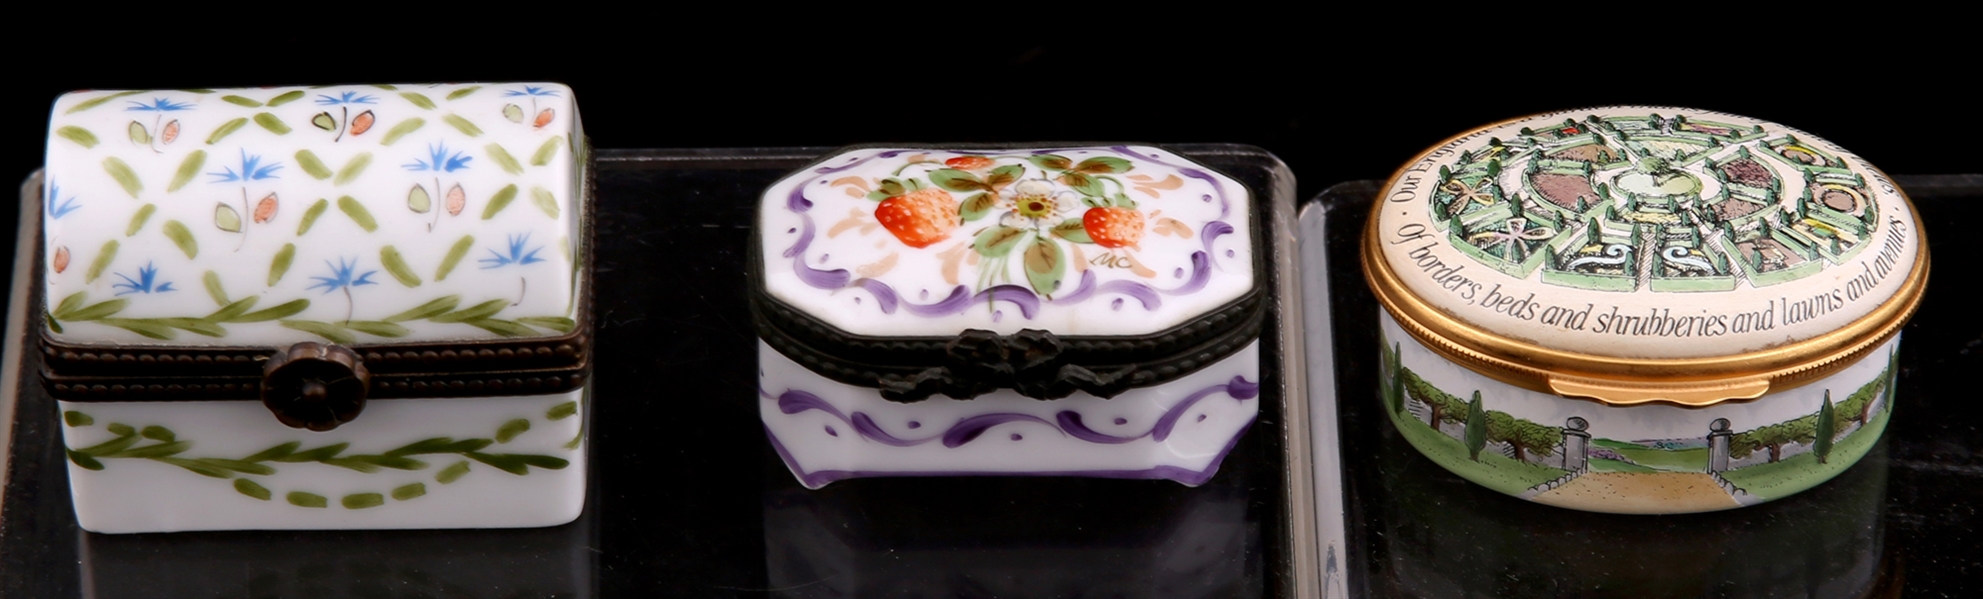 HALCYON DAYS AND LIMOGES TRINKET BOXES - LOT OF 3